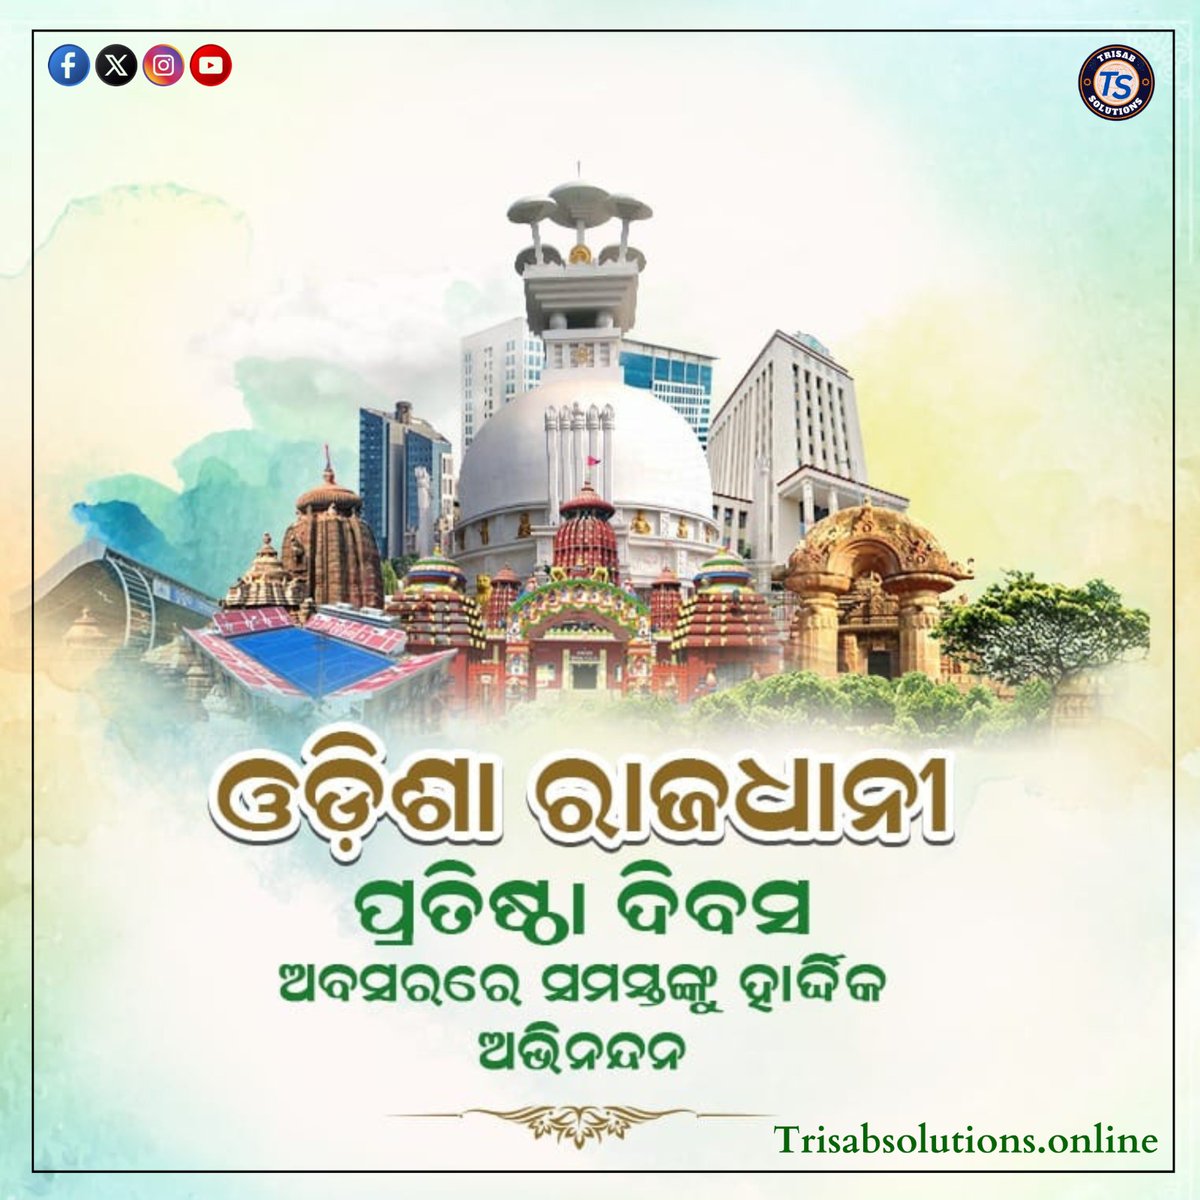 The Capital city of #Odisha is celebrating it's 76th Foundation Day , it is the new information Technology Hub of #India , Life is joyful in this beautiful city . #capitalfoundationday #BhubaneswarFoundationDay #Bhubaneswar #bhubaneswarbuzz